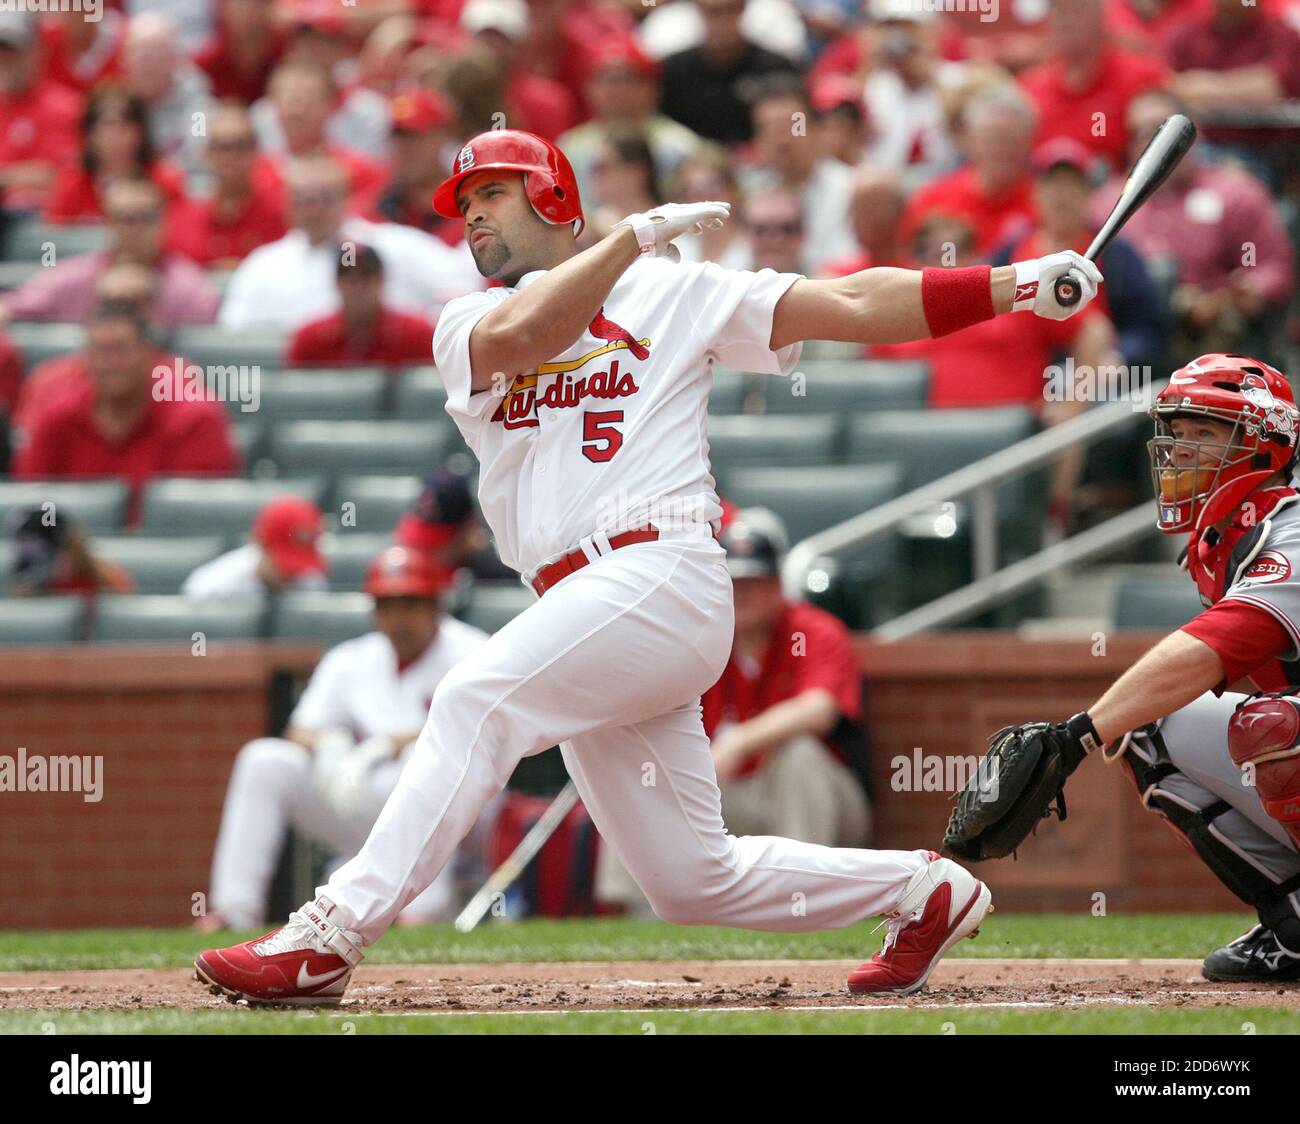 Pujols' first hit since rejoining the Cardinals was—of course—a home run at  Busch Stadium